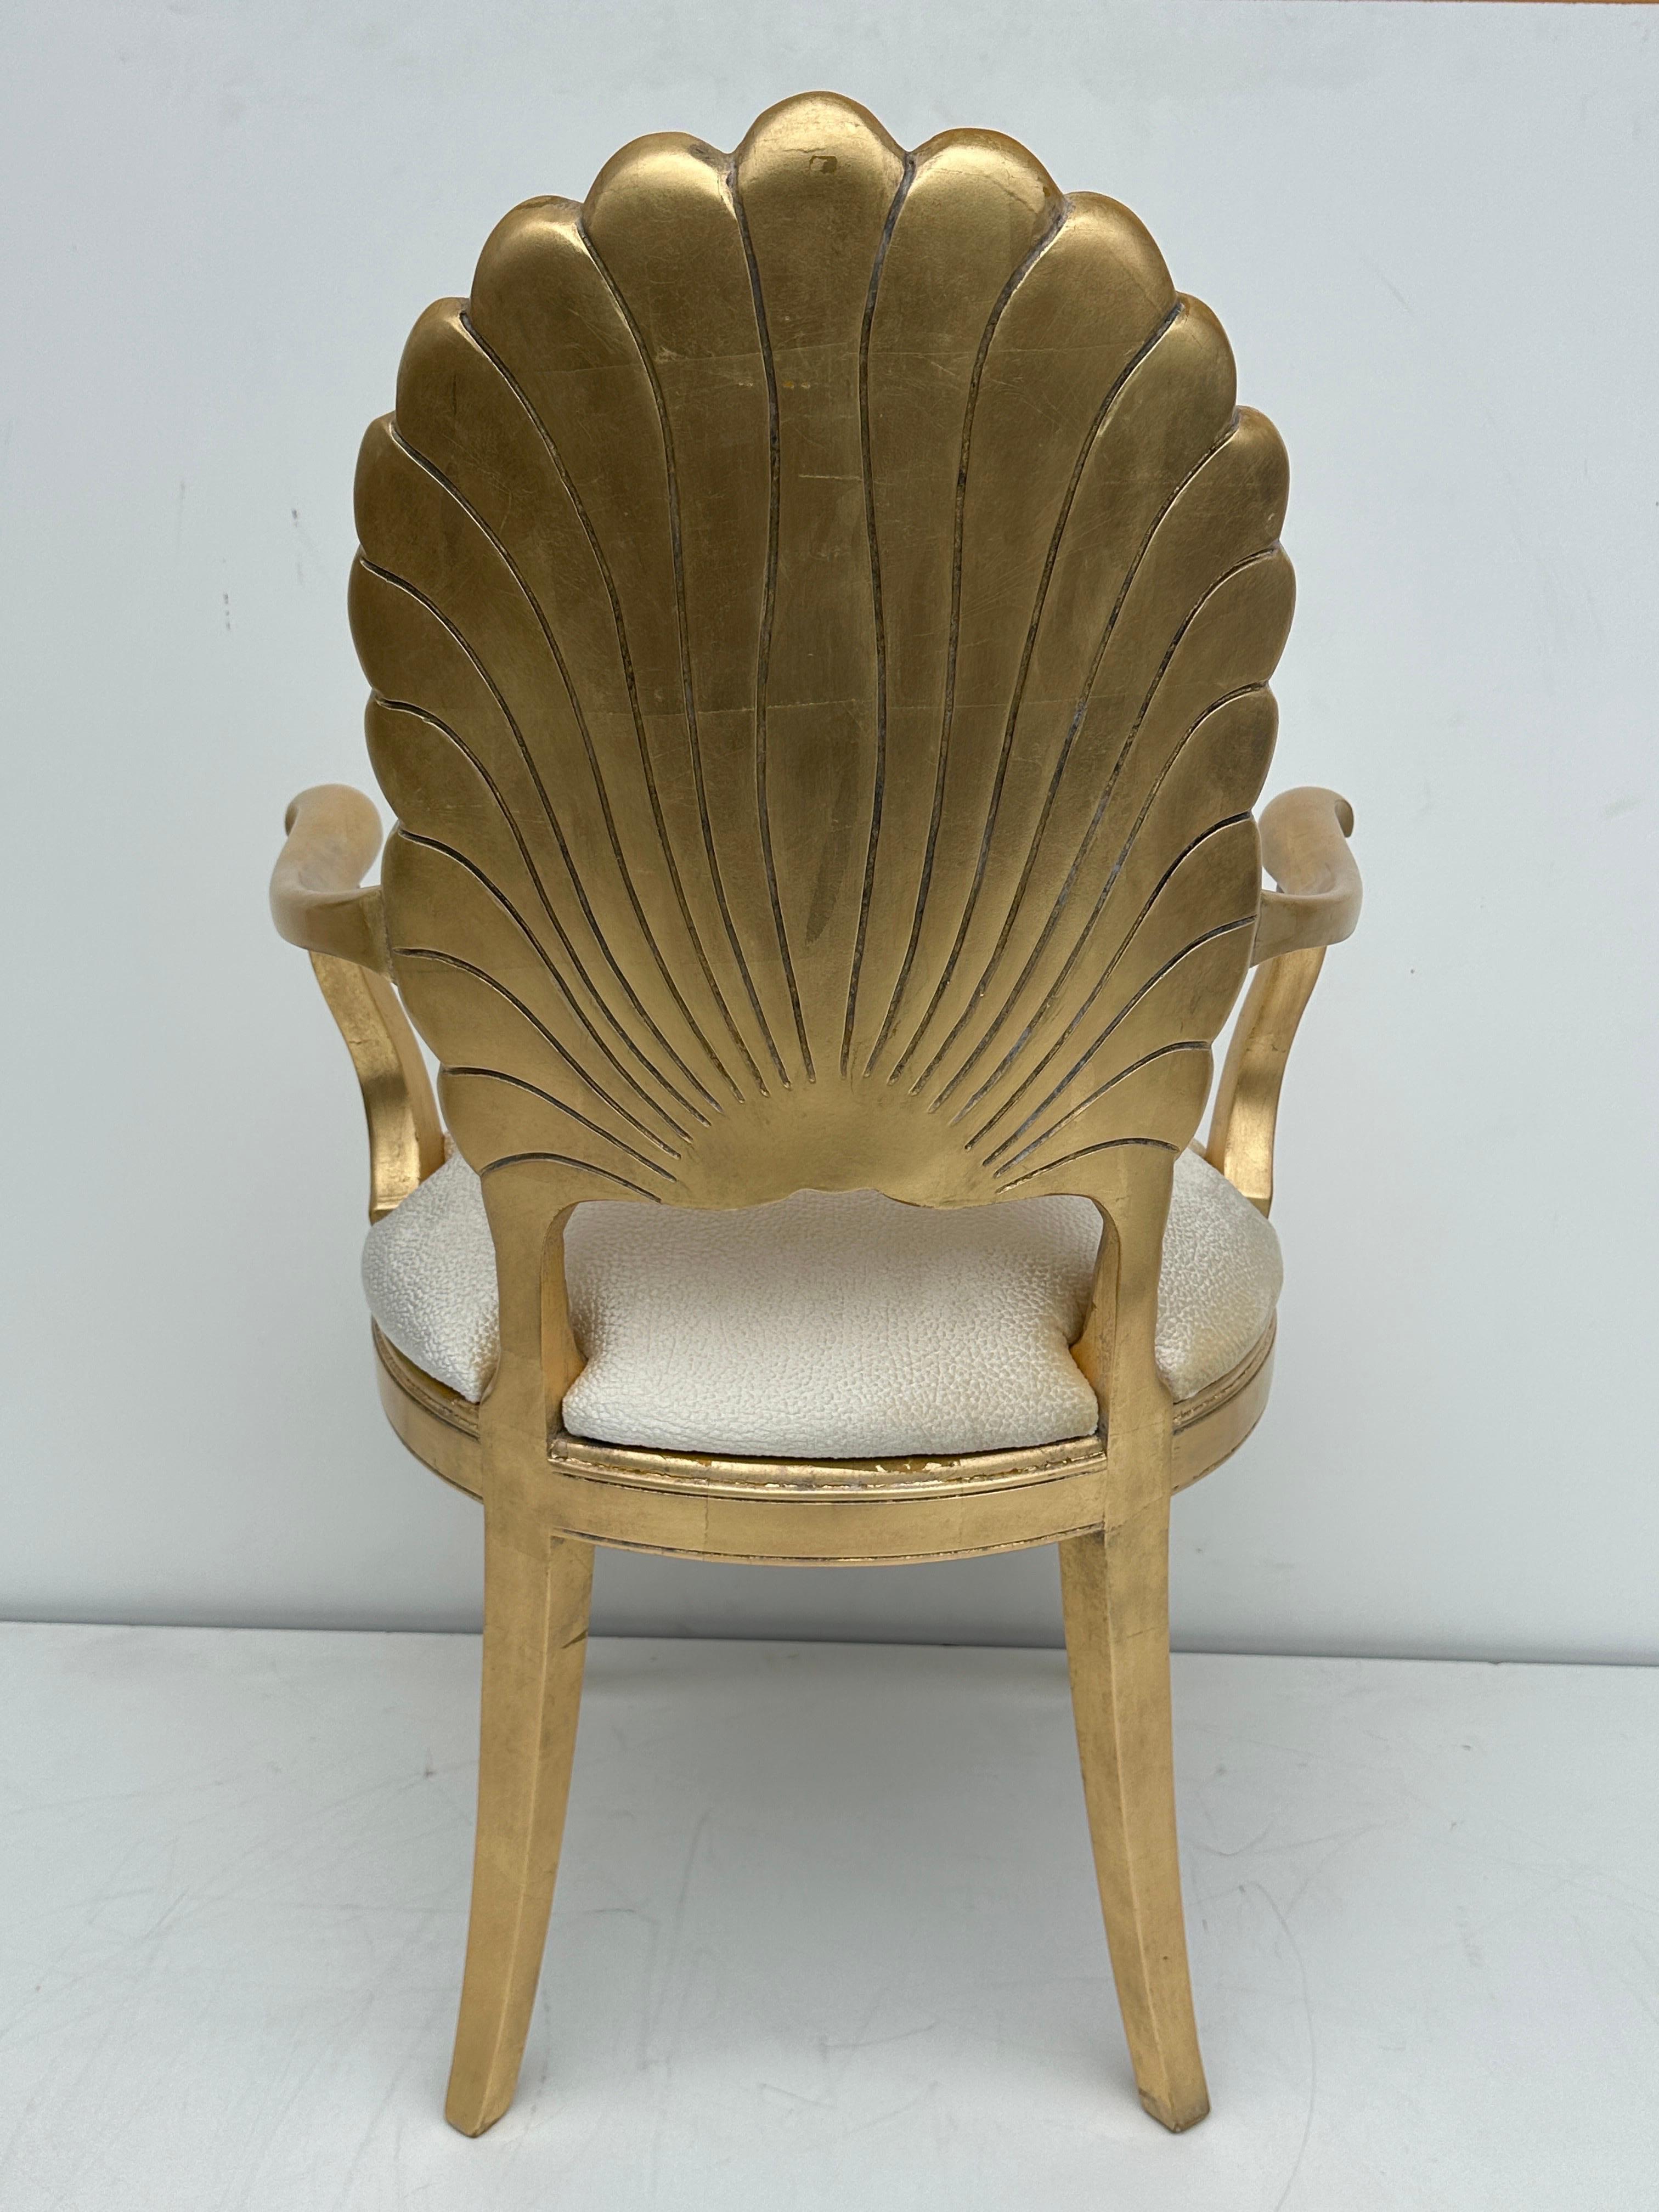 Gold Leaf Venetian Grotto Style Shell Back Chair In Good Condition For Sale In North Hollywood, CA